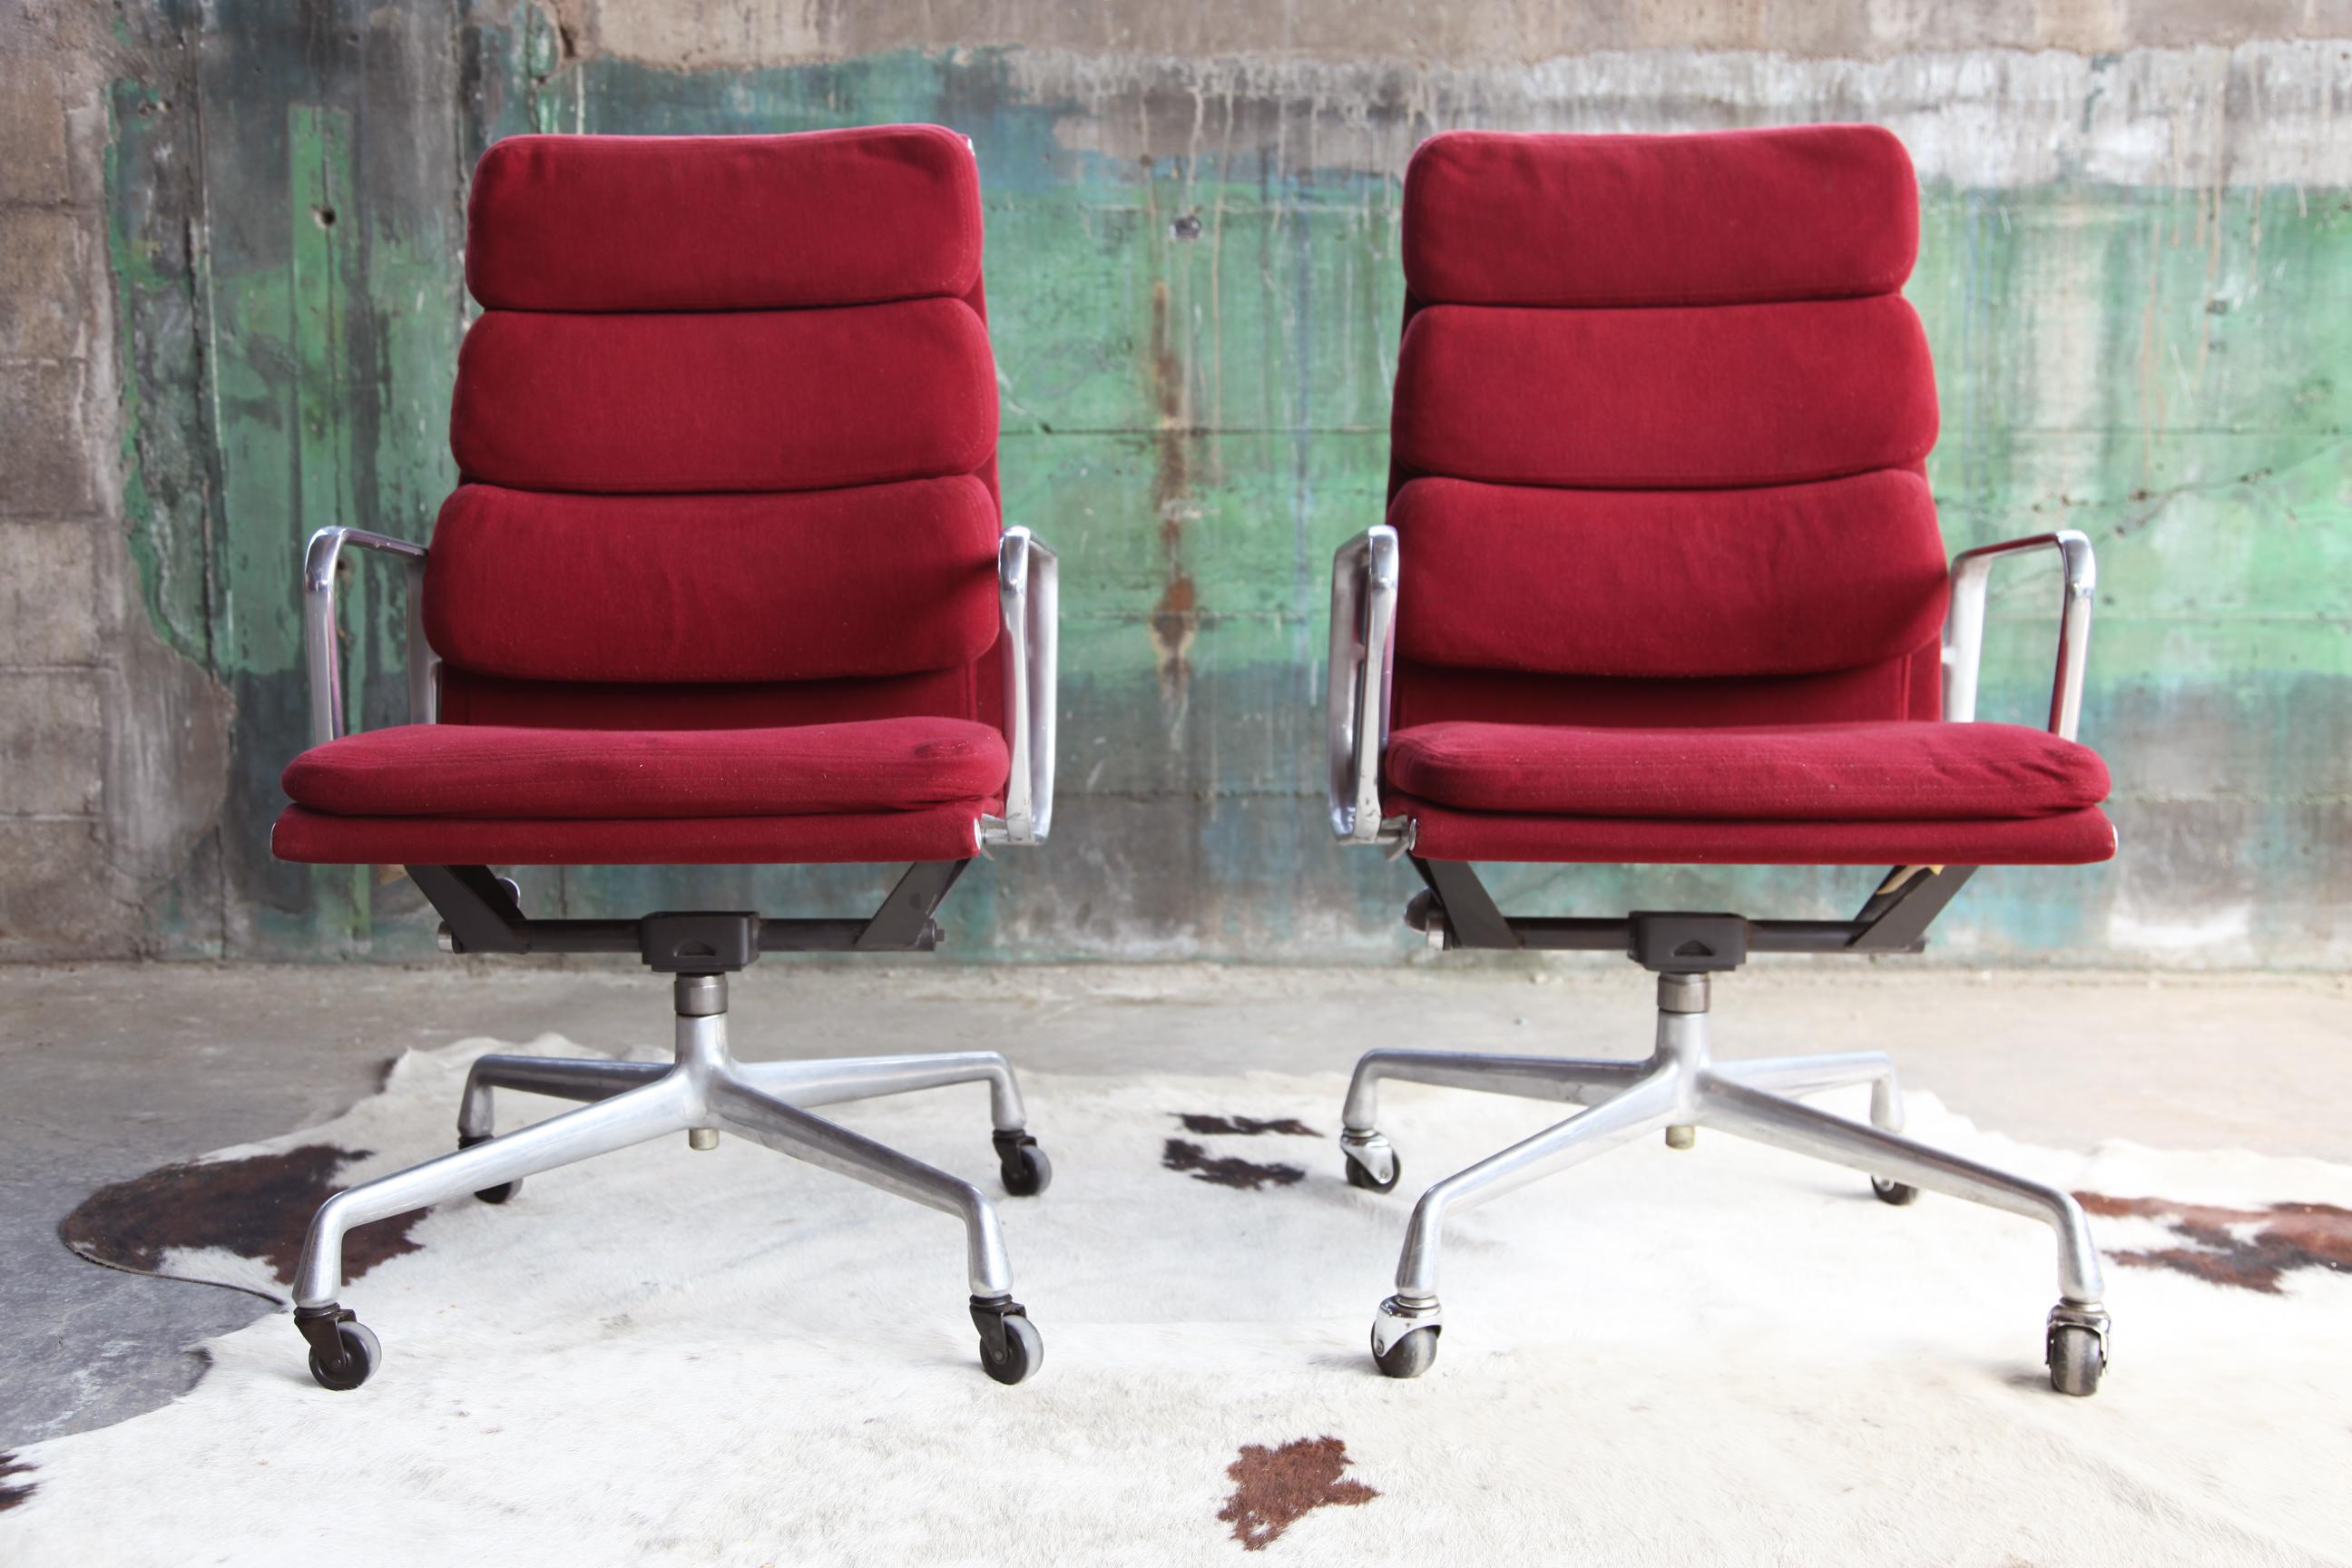 Dimensions
Here is a RARE opportunity to purchase an incredible set of 5 stunning, vintage in-tact original Herman Miller soft pad Executive Lounge or Office chair from the 1980s!! (eight originally, three have SOLD)

Alternatively, here is also